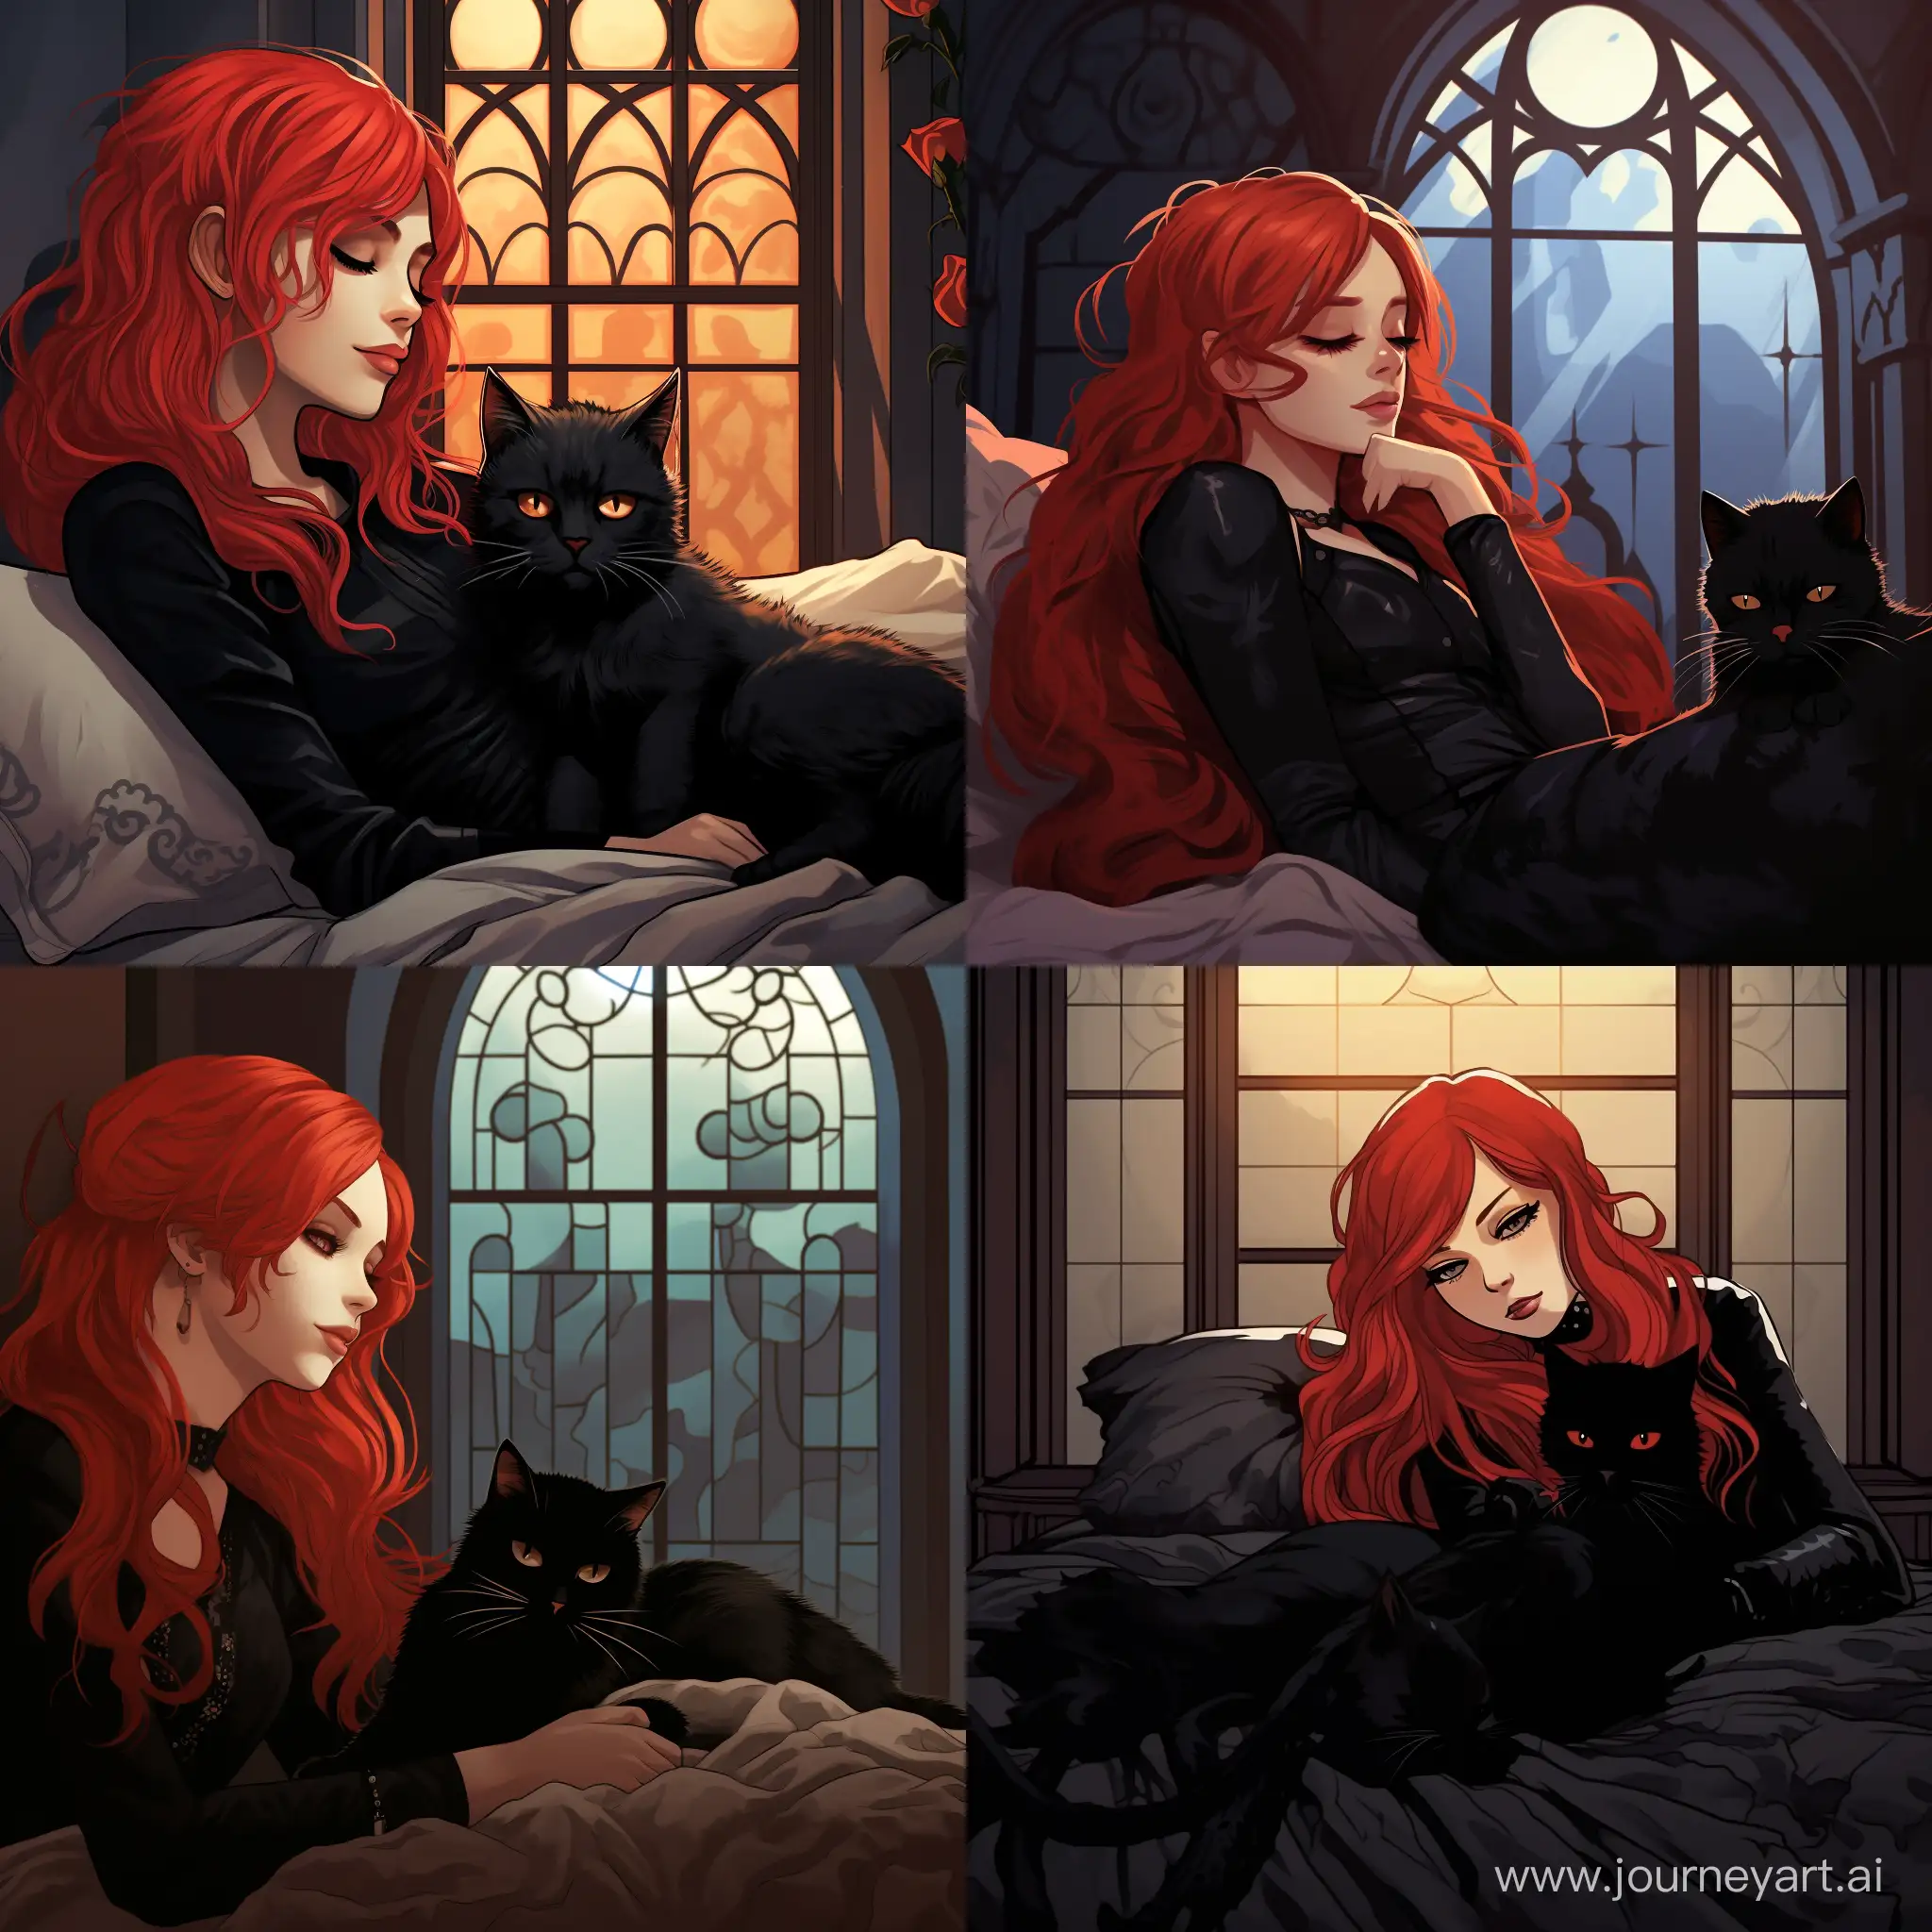 Surreal-Daytime-Nap-RedHaired-Gothic-Girl-in-Black-Dress-with-Gothic-Cat